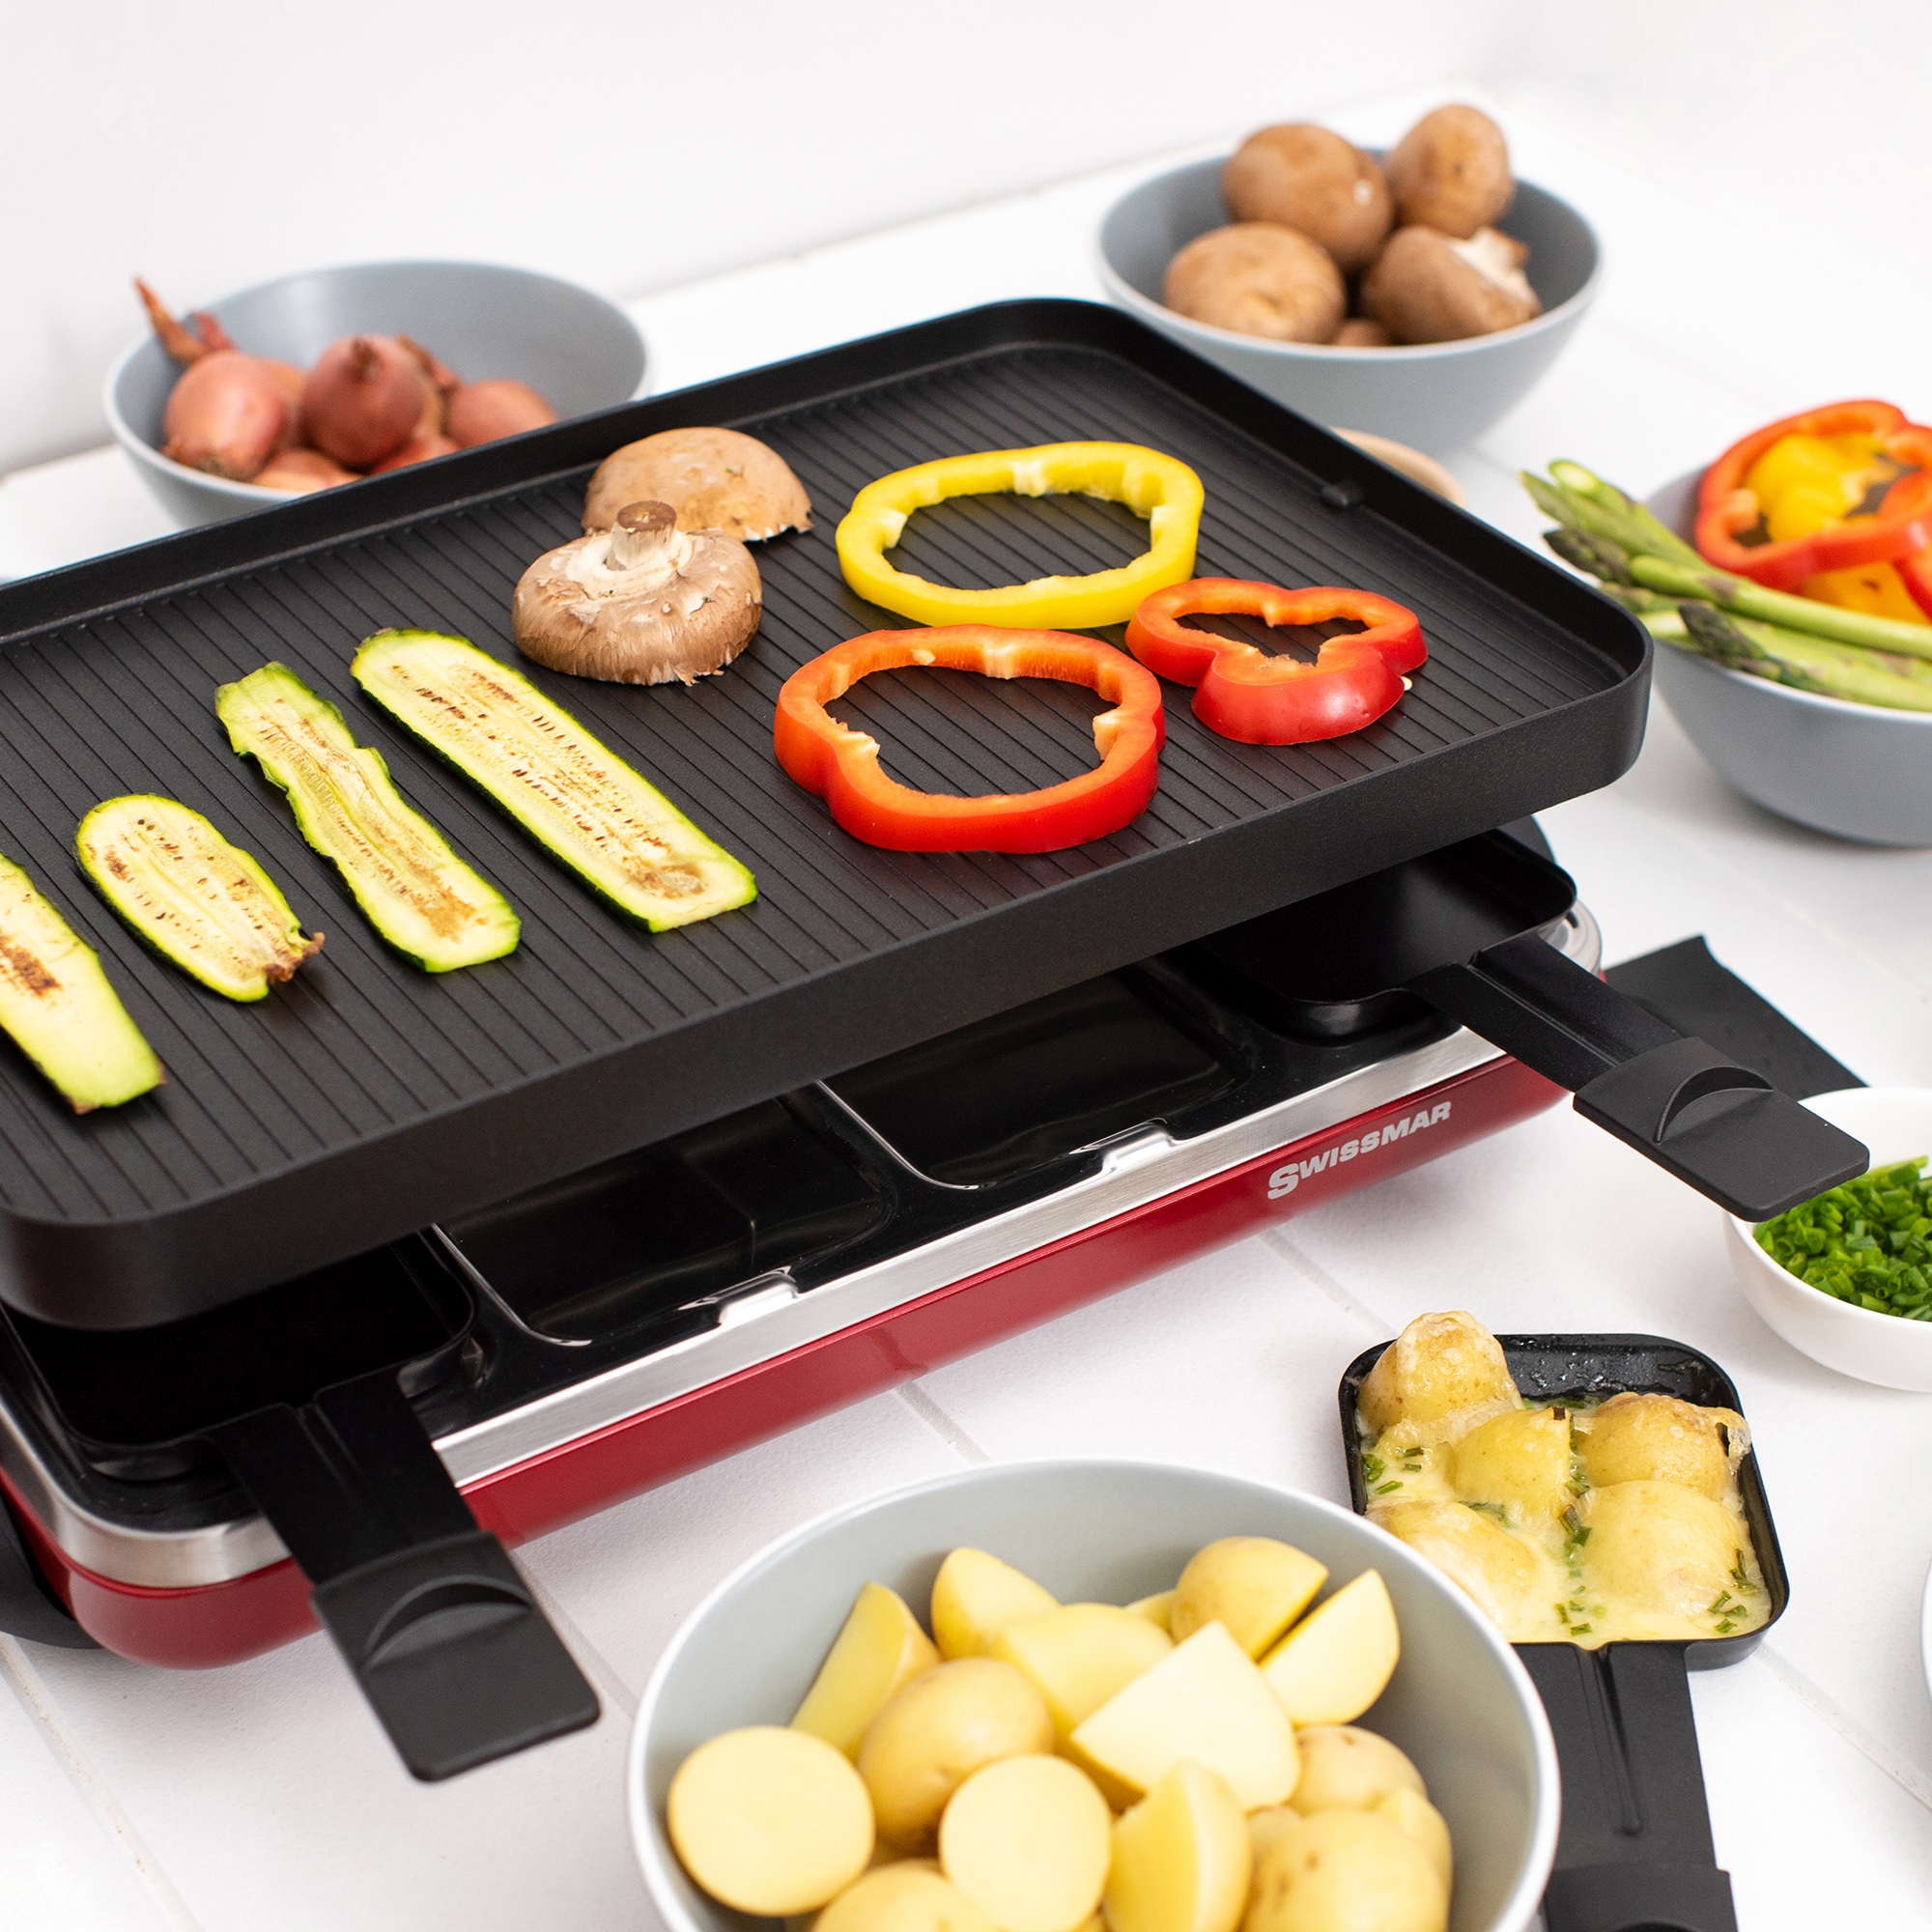 Swissmar Valais 8 Person Raclette Party Grill Red Image 2